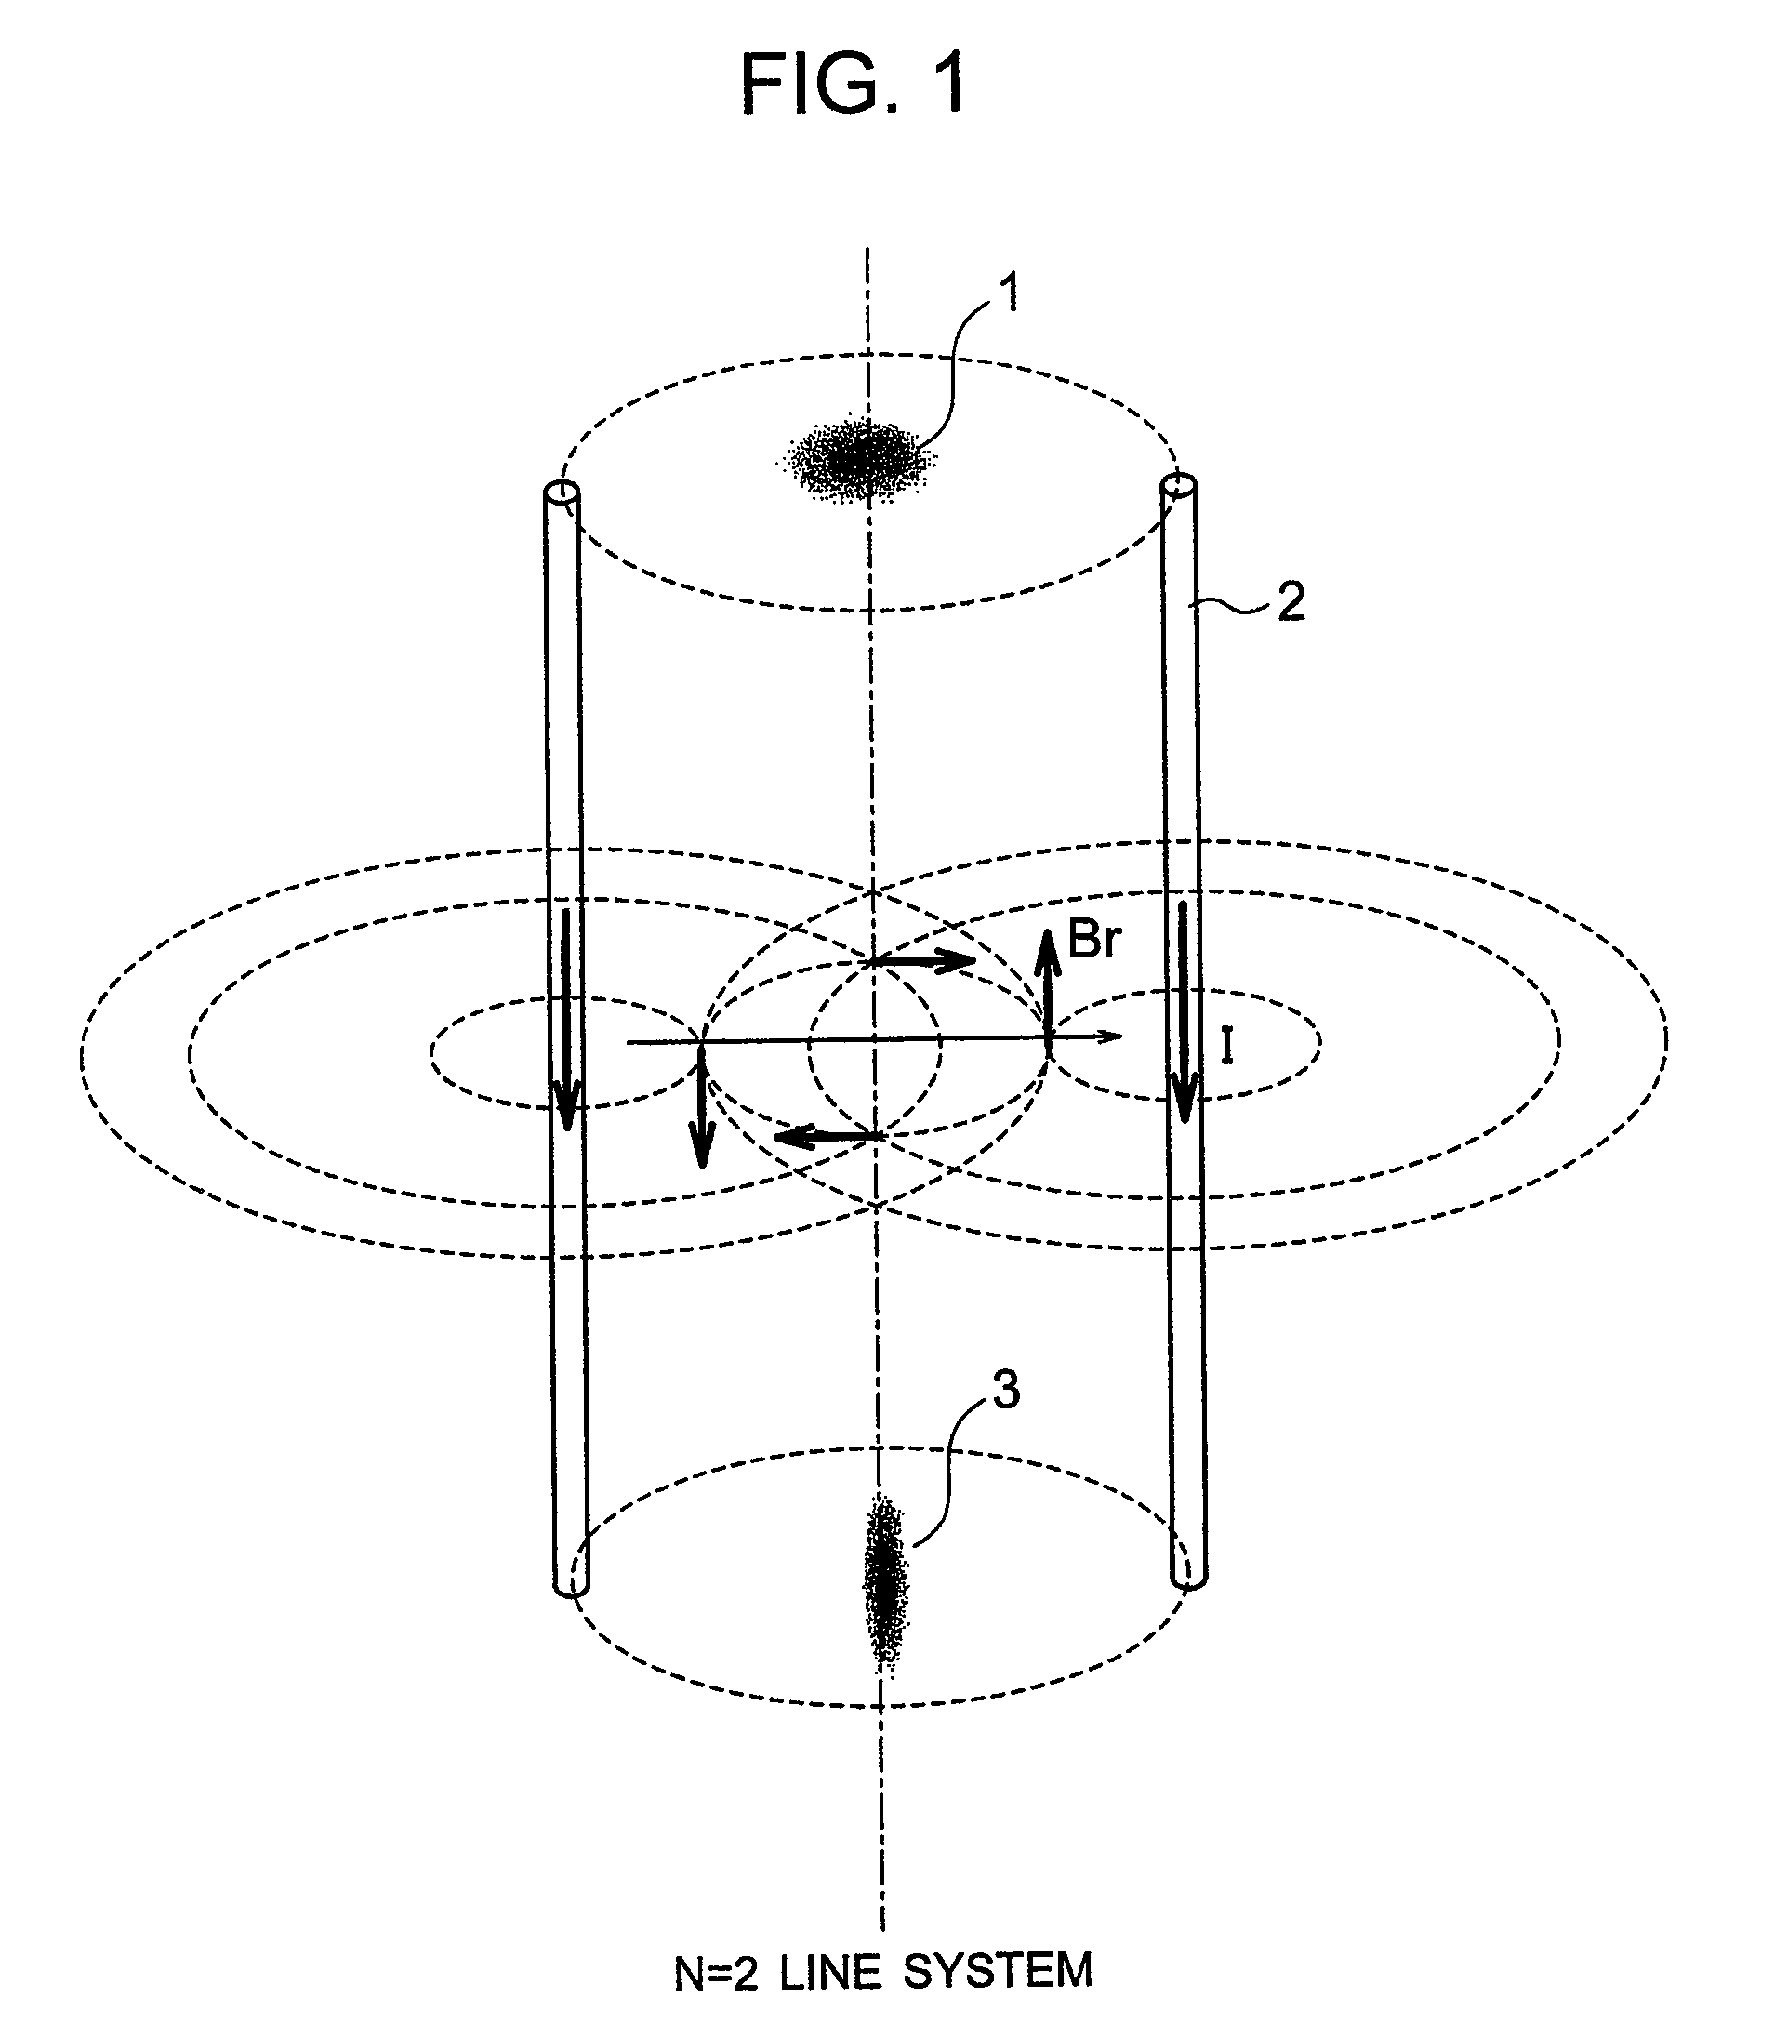 Corrector for charged-particle beam aberration and charged-particle beam apparatus